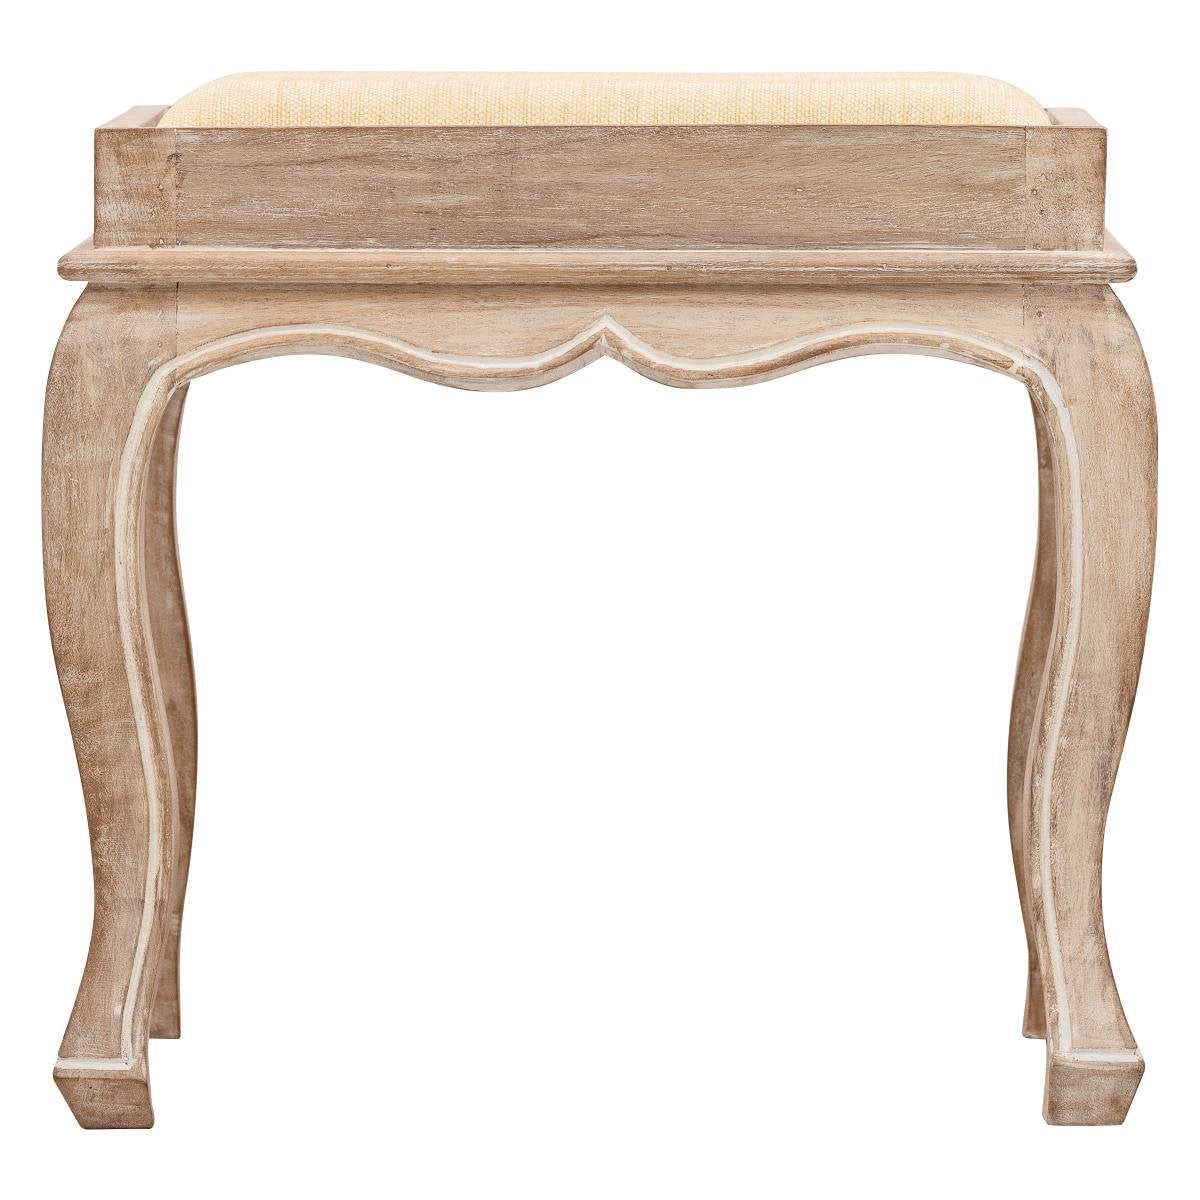 Wooden Stool - Edelweiss Collection